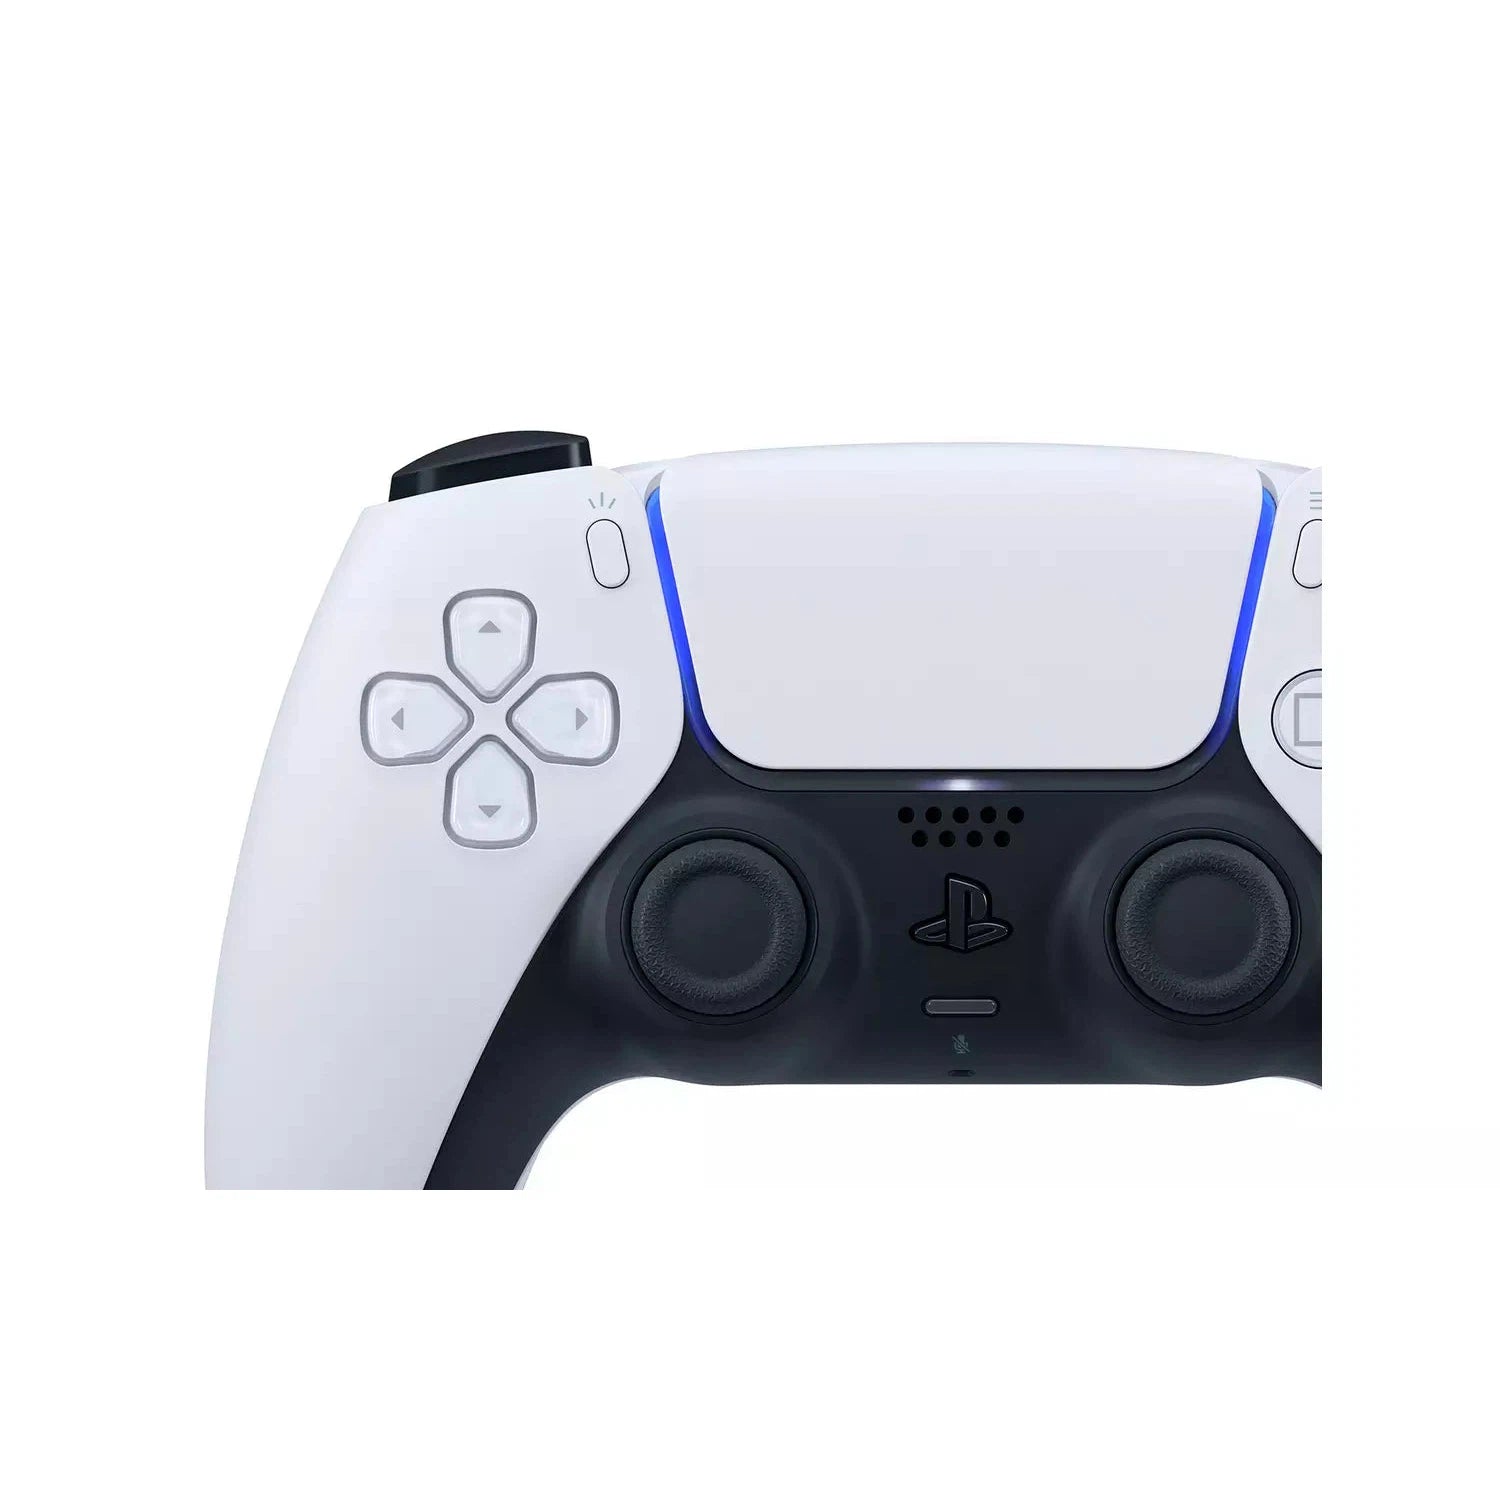 Sony PS5 DualSense Wireless Controller - White - Refurbished Excellent